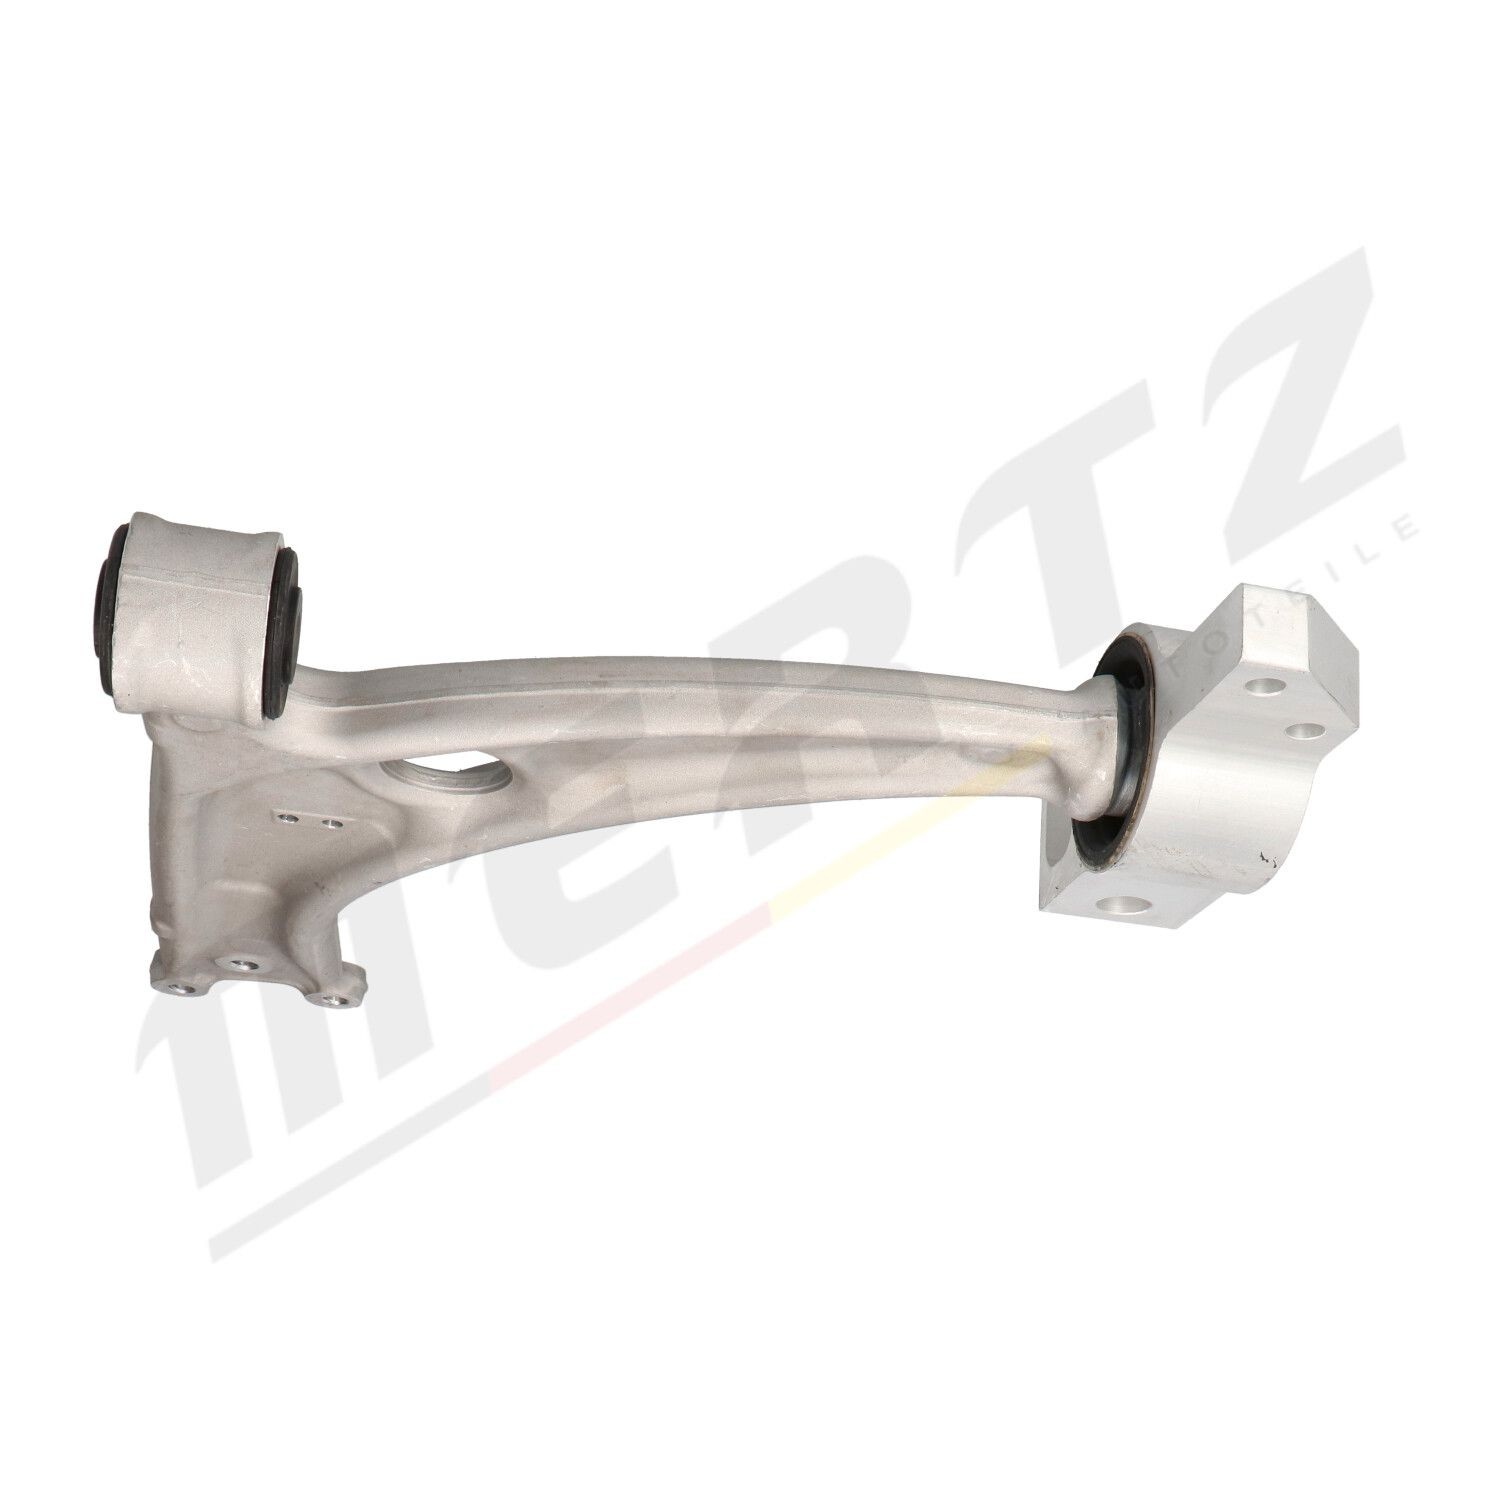 M-S0788 Suspension wishbone arm M-S0788 MERTZ without ball joint, with bearing(s), Front Axle Left, Front Axle Right, Control Arm, Aluminium